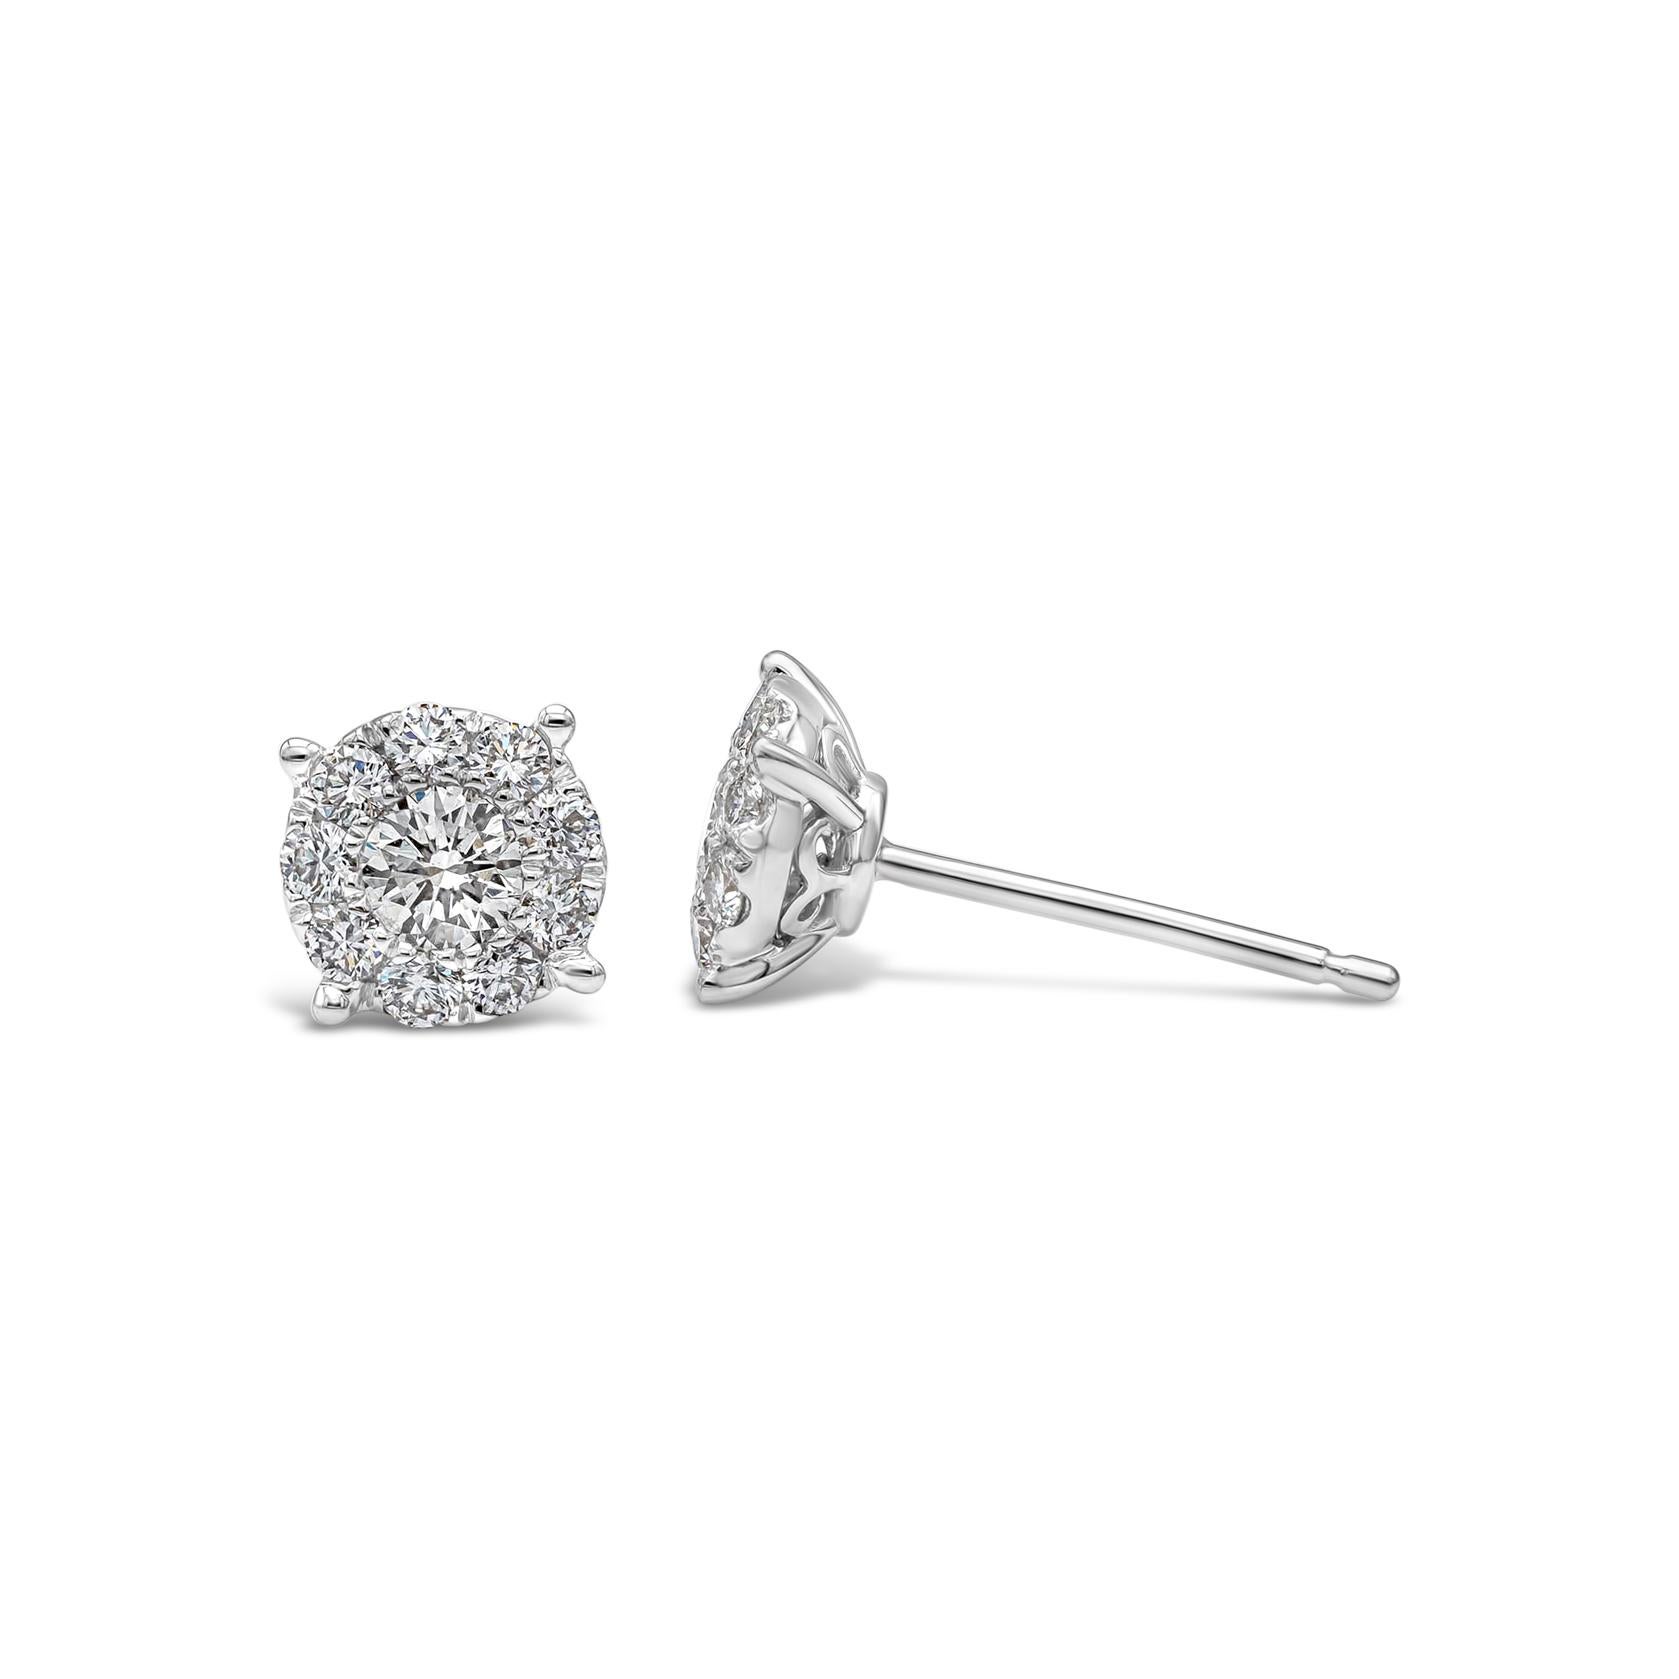 A budget-friendly style stud earrings showcasing a cluster of round brilliant diamonds set in an 18k white gold setting. The earrings exude the look of a  one carat each diamond stud earrings. Diamonds weigh 0.66 carats total.

Style available in